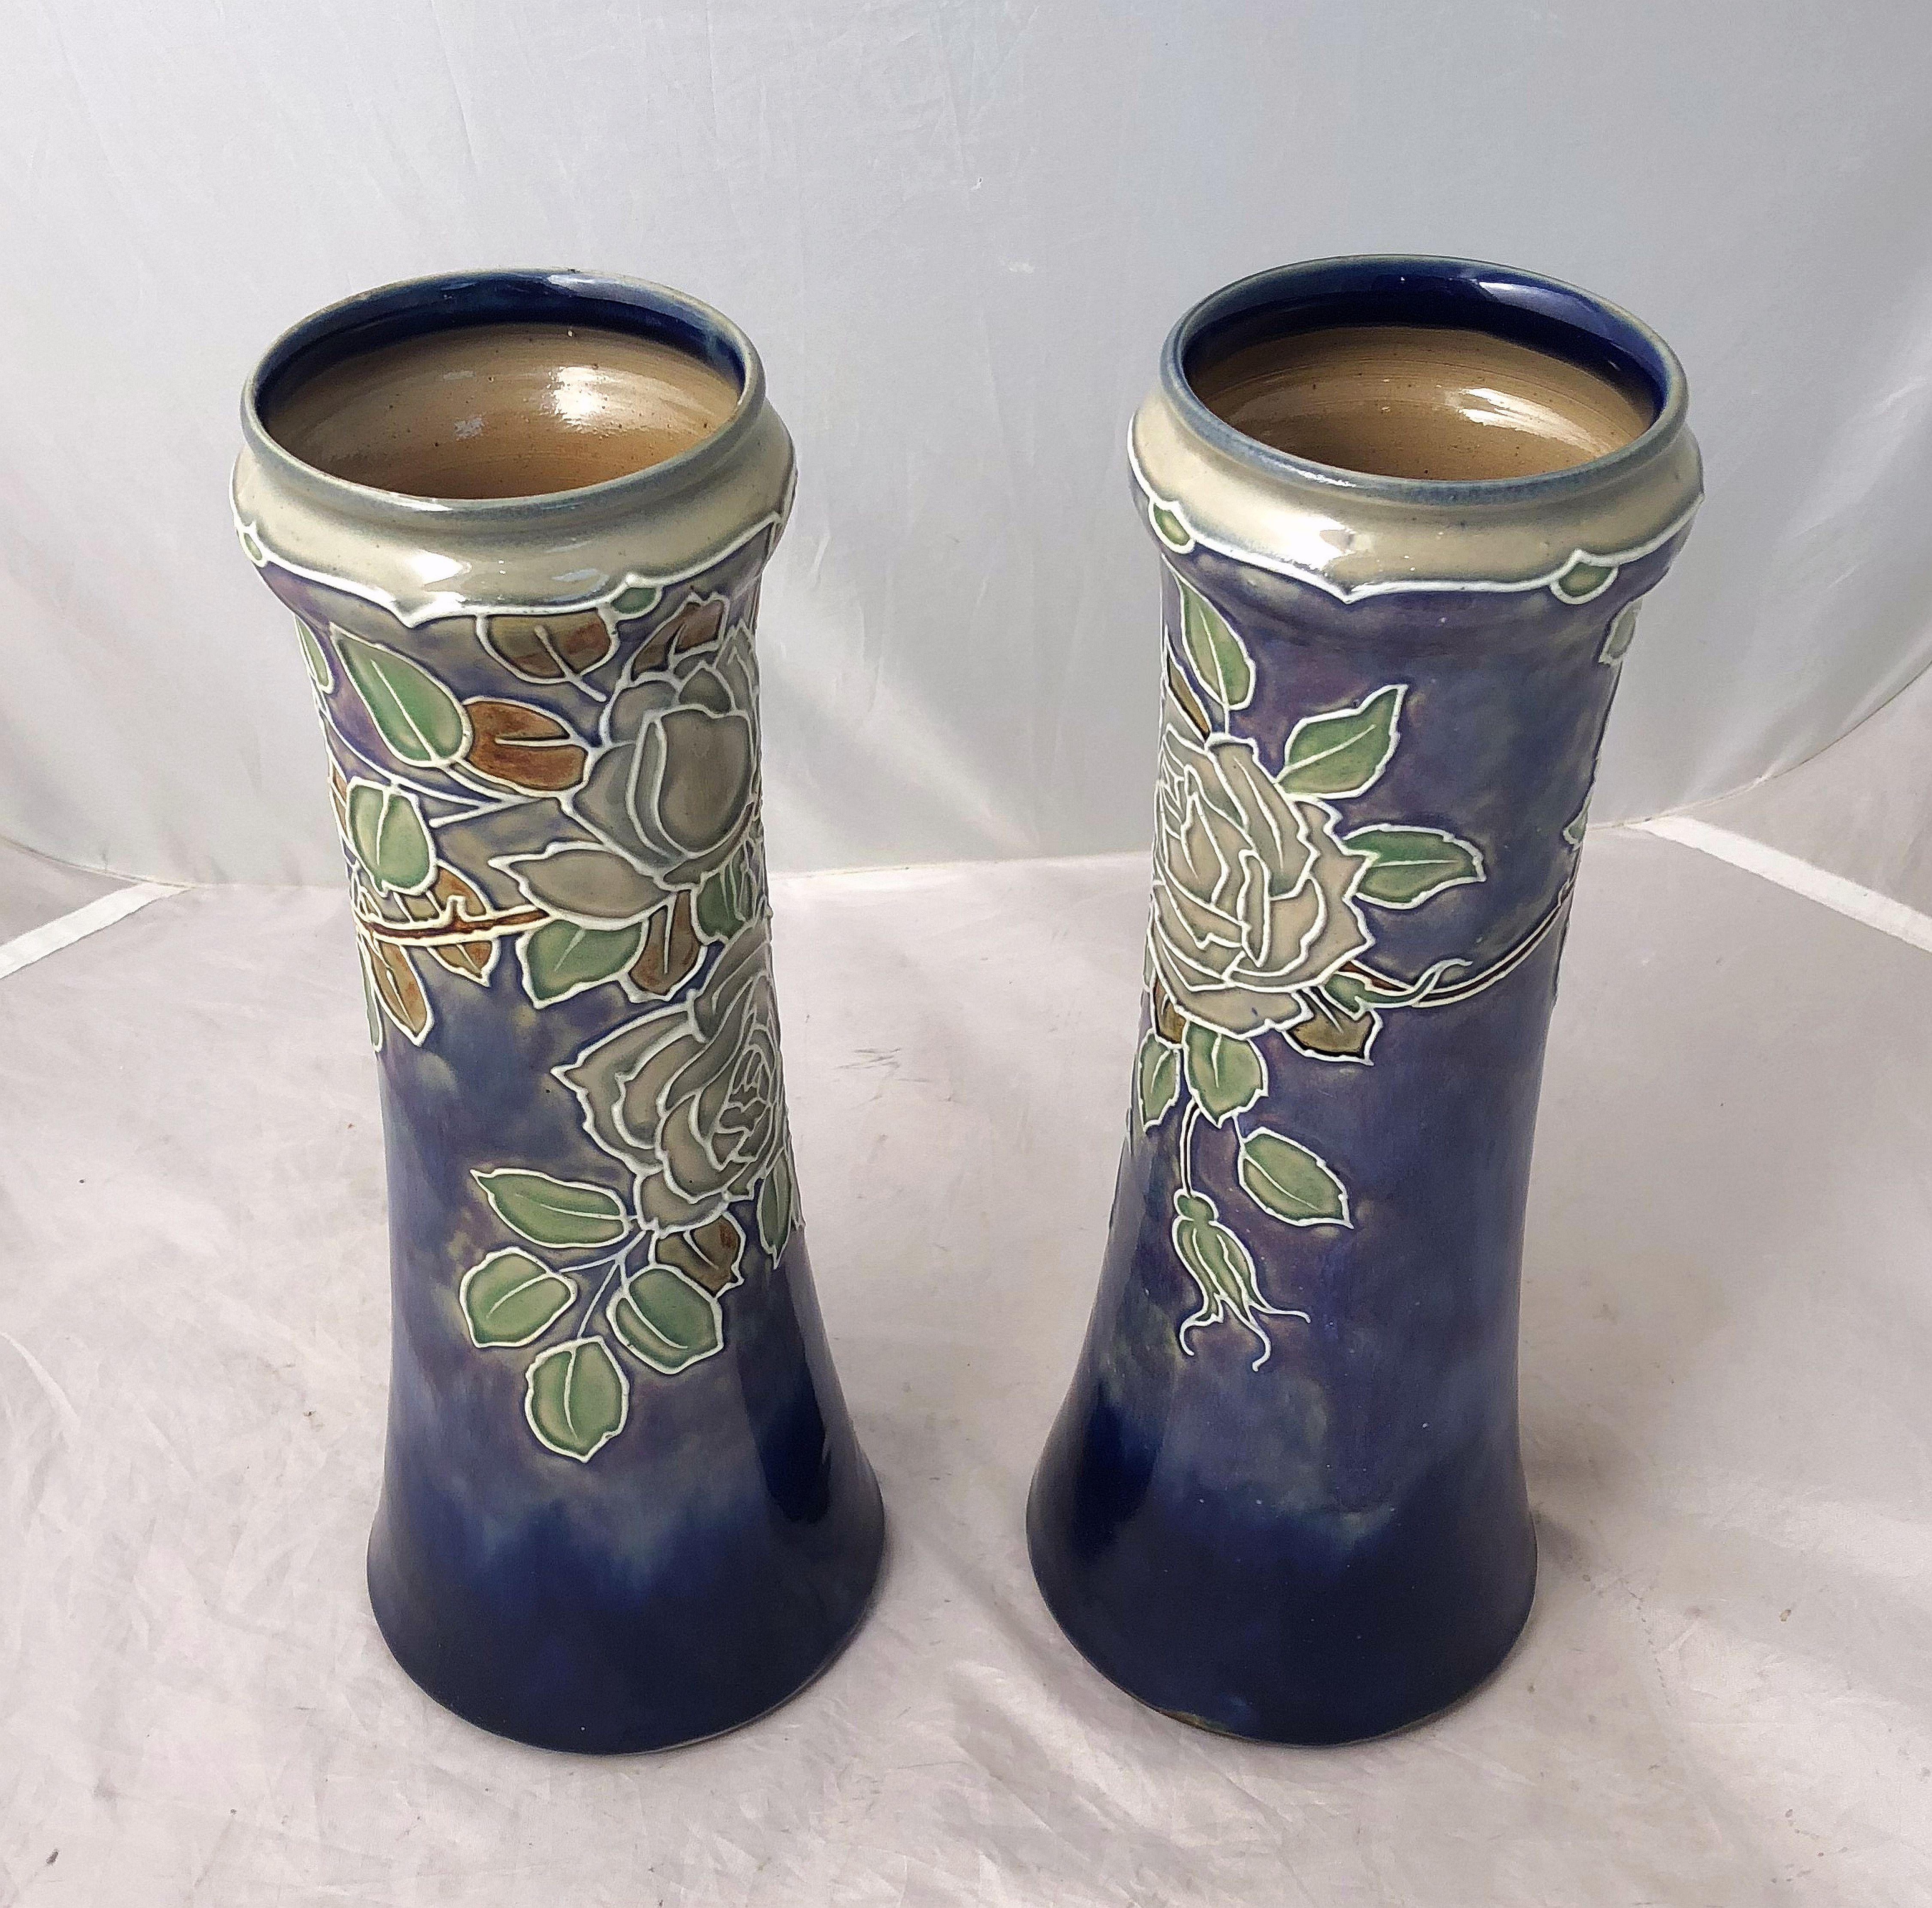 Glazed Pair of Royal Doulton Vases from the Arts & Crafts Period, 'Priced as a Pair' For Sale